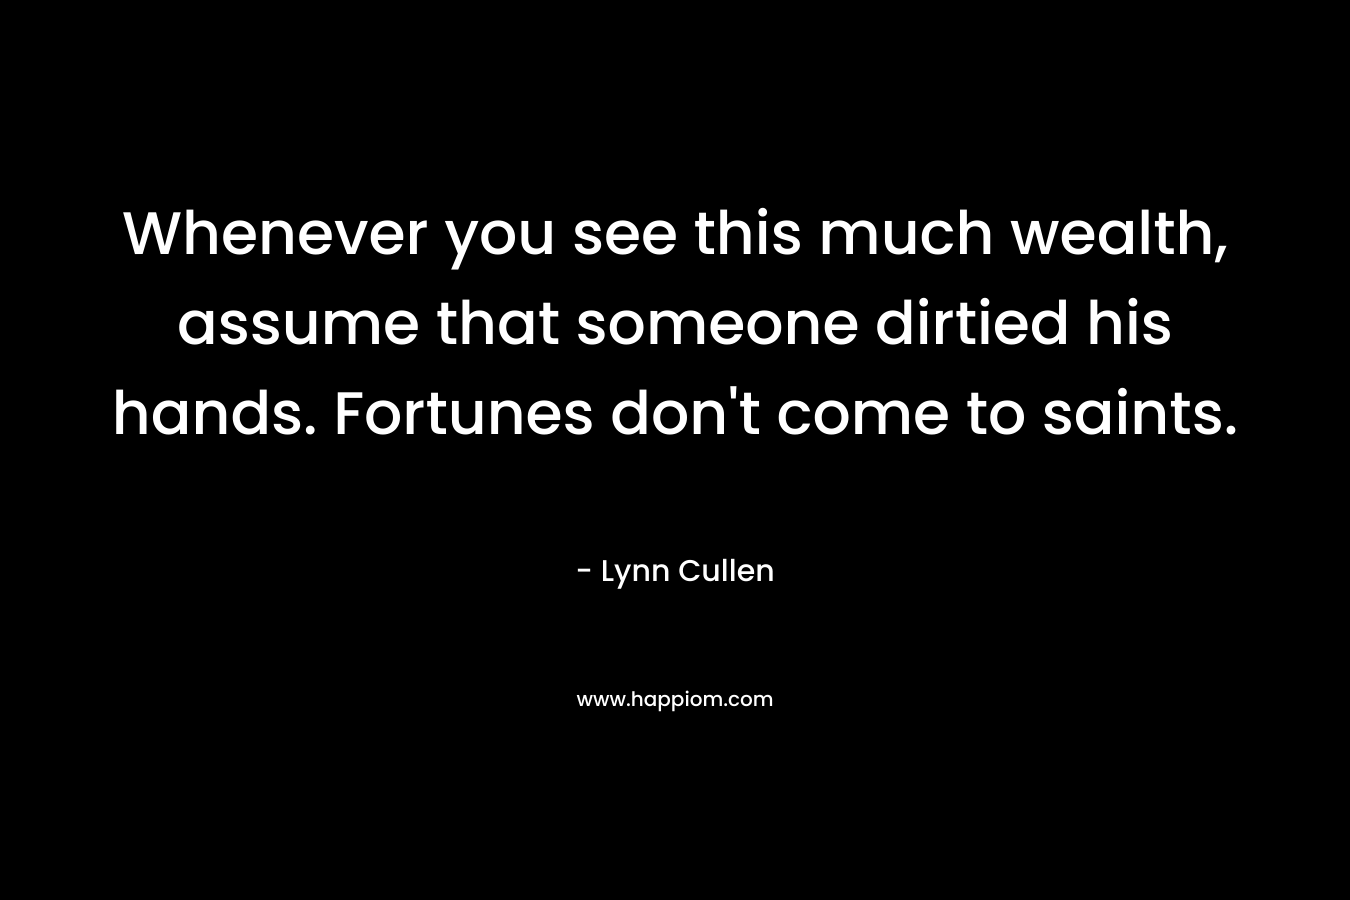 Whenever you see this much wealth, assume that someone dirtied his hands. Fortunes don’t come to saints. – Lynn Cullen